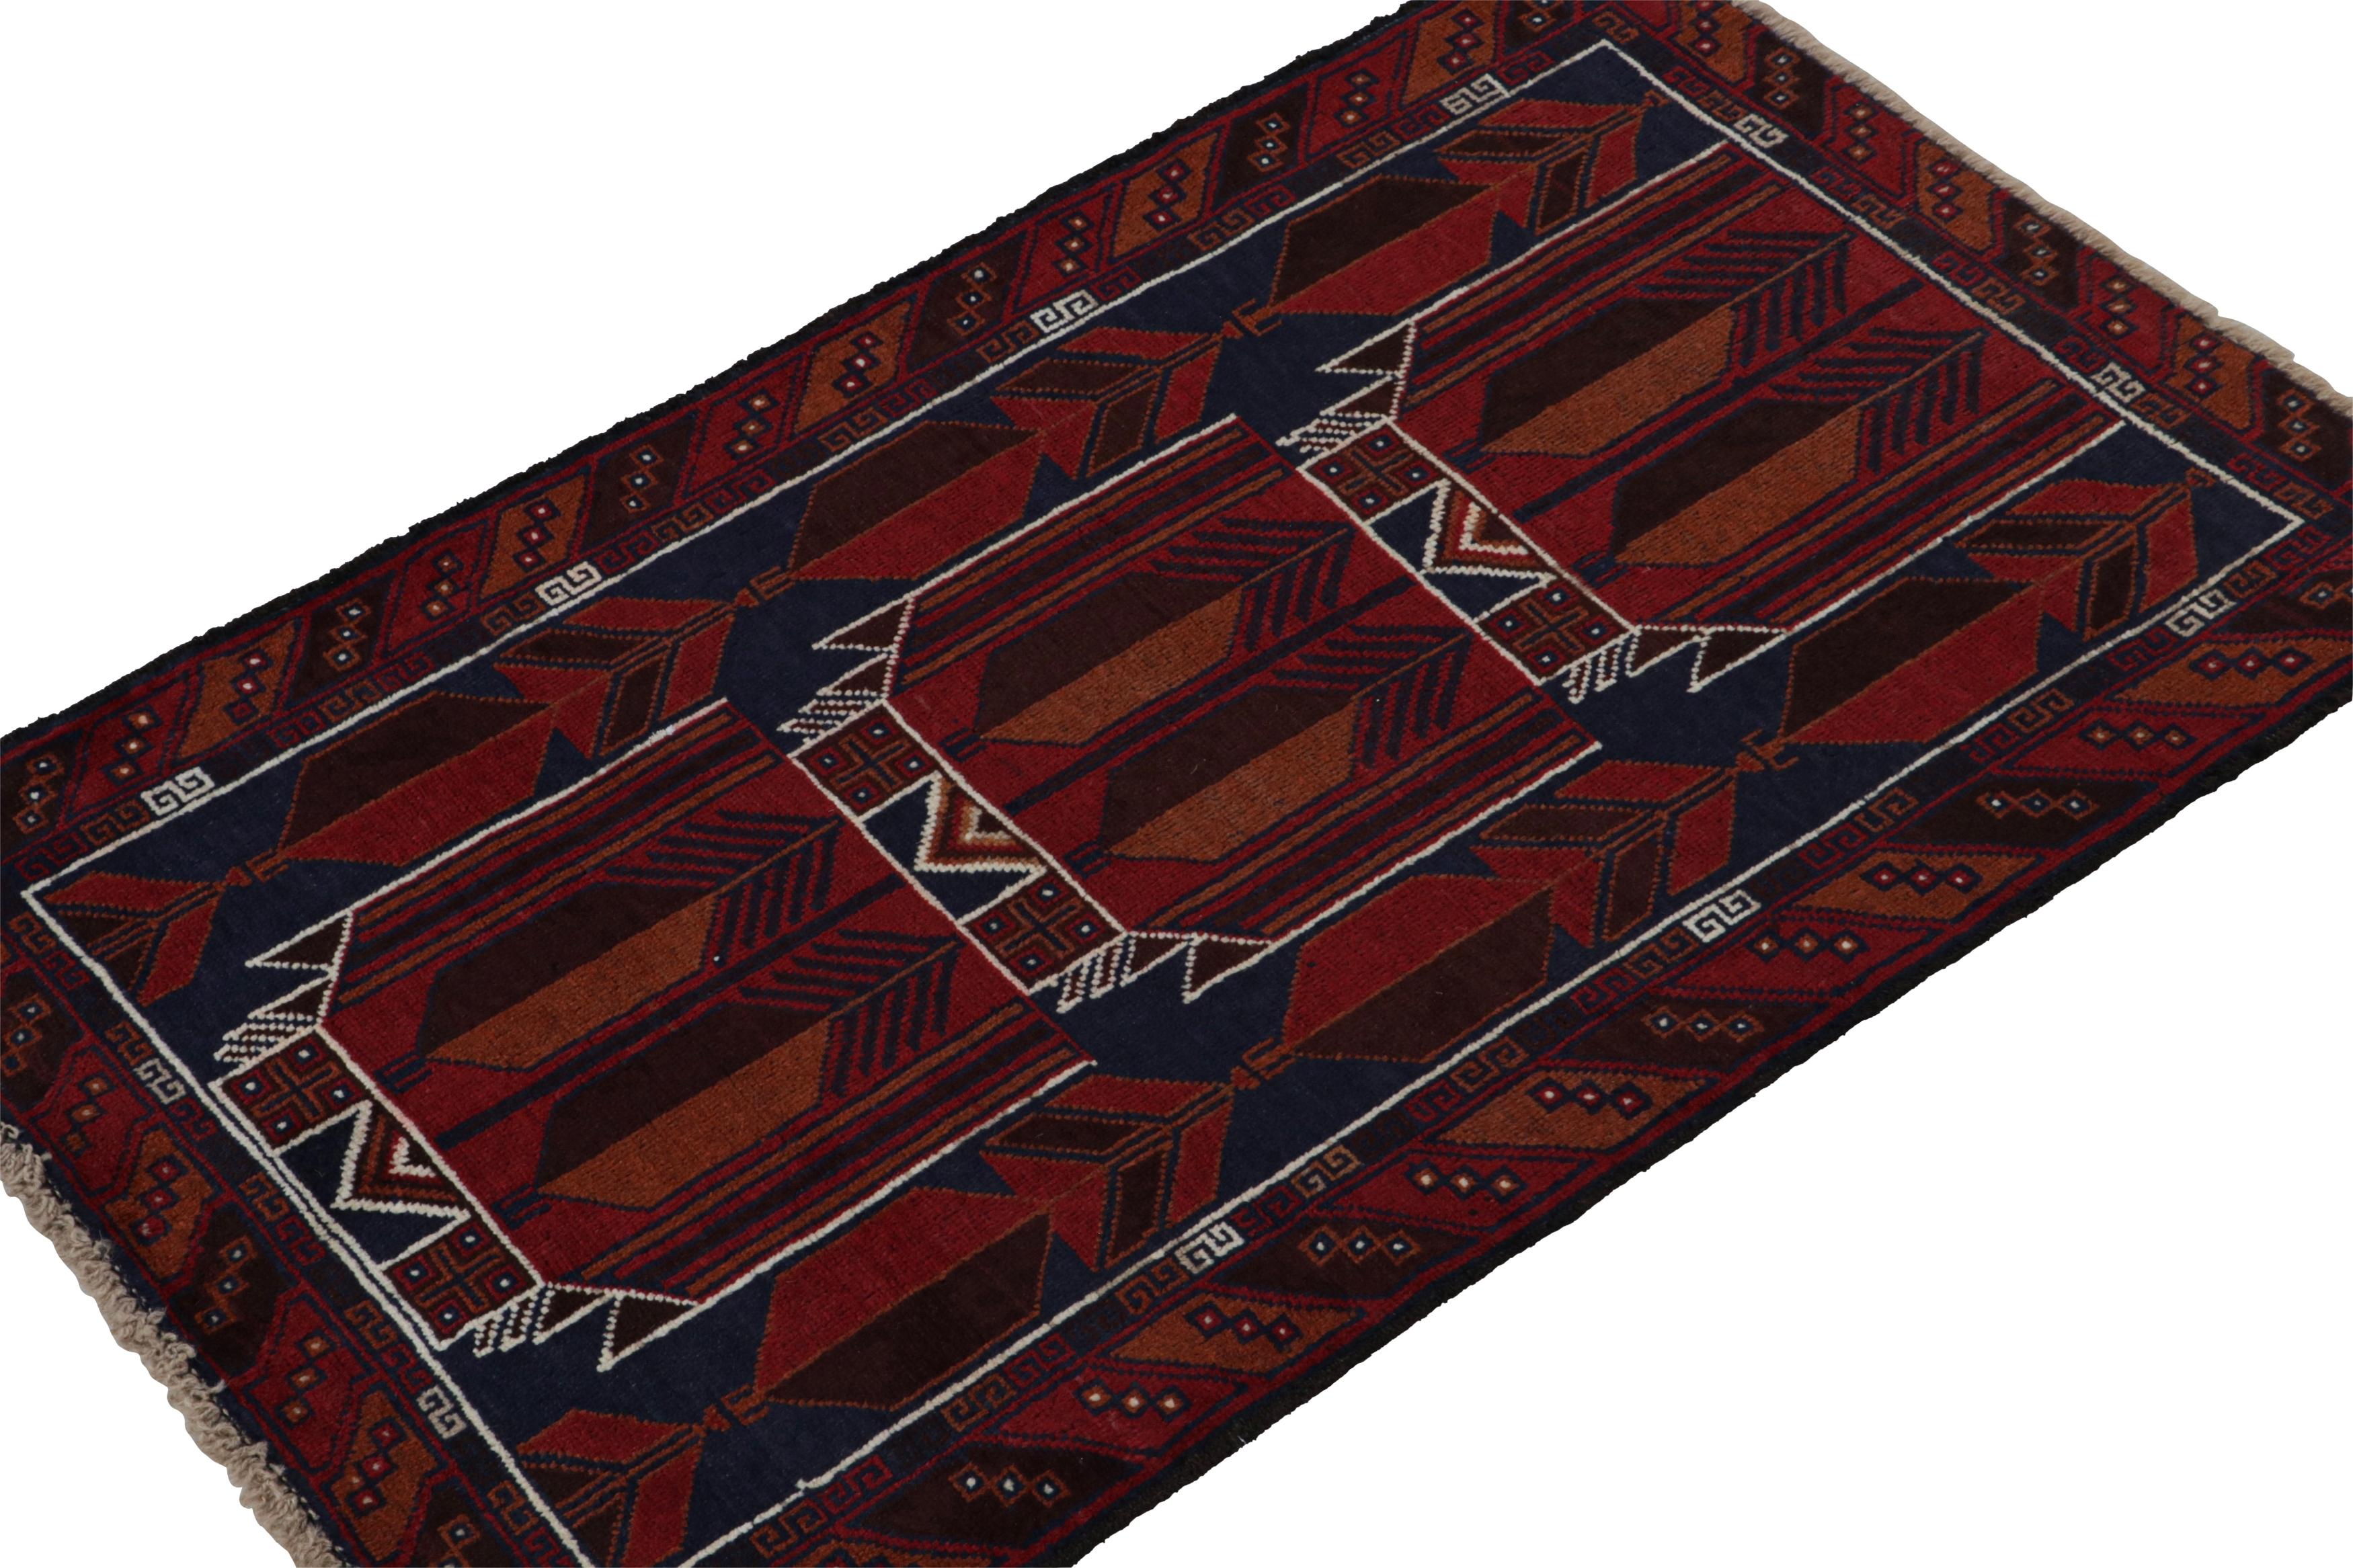 Hand-knotted in wool, this 3x4 Baluch Persian rug of the 1950s is the latest to enter Rug & Kilim’s Antique & Vintage collection.

On the Design:

The piece features tribal geometric patterns in tones of red, blue & brown with fine white detailing.